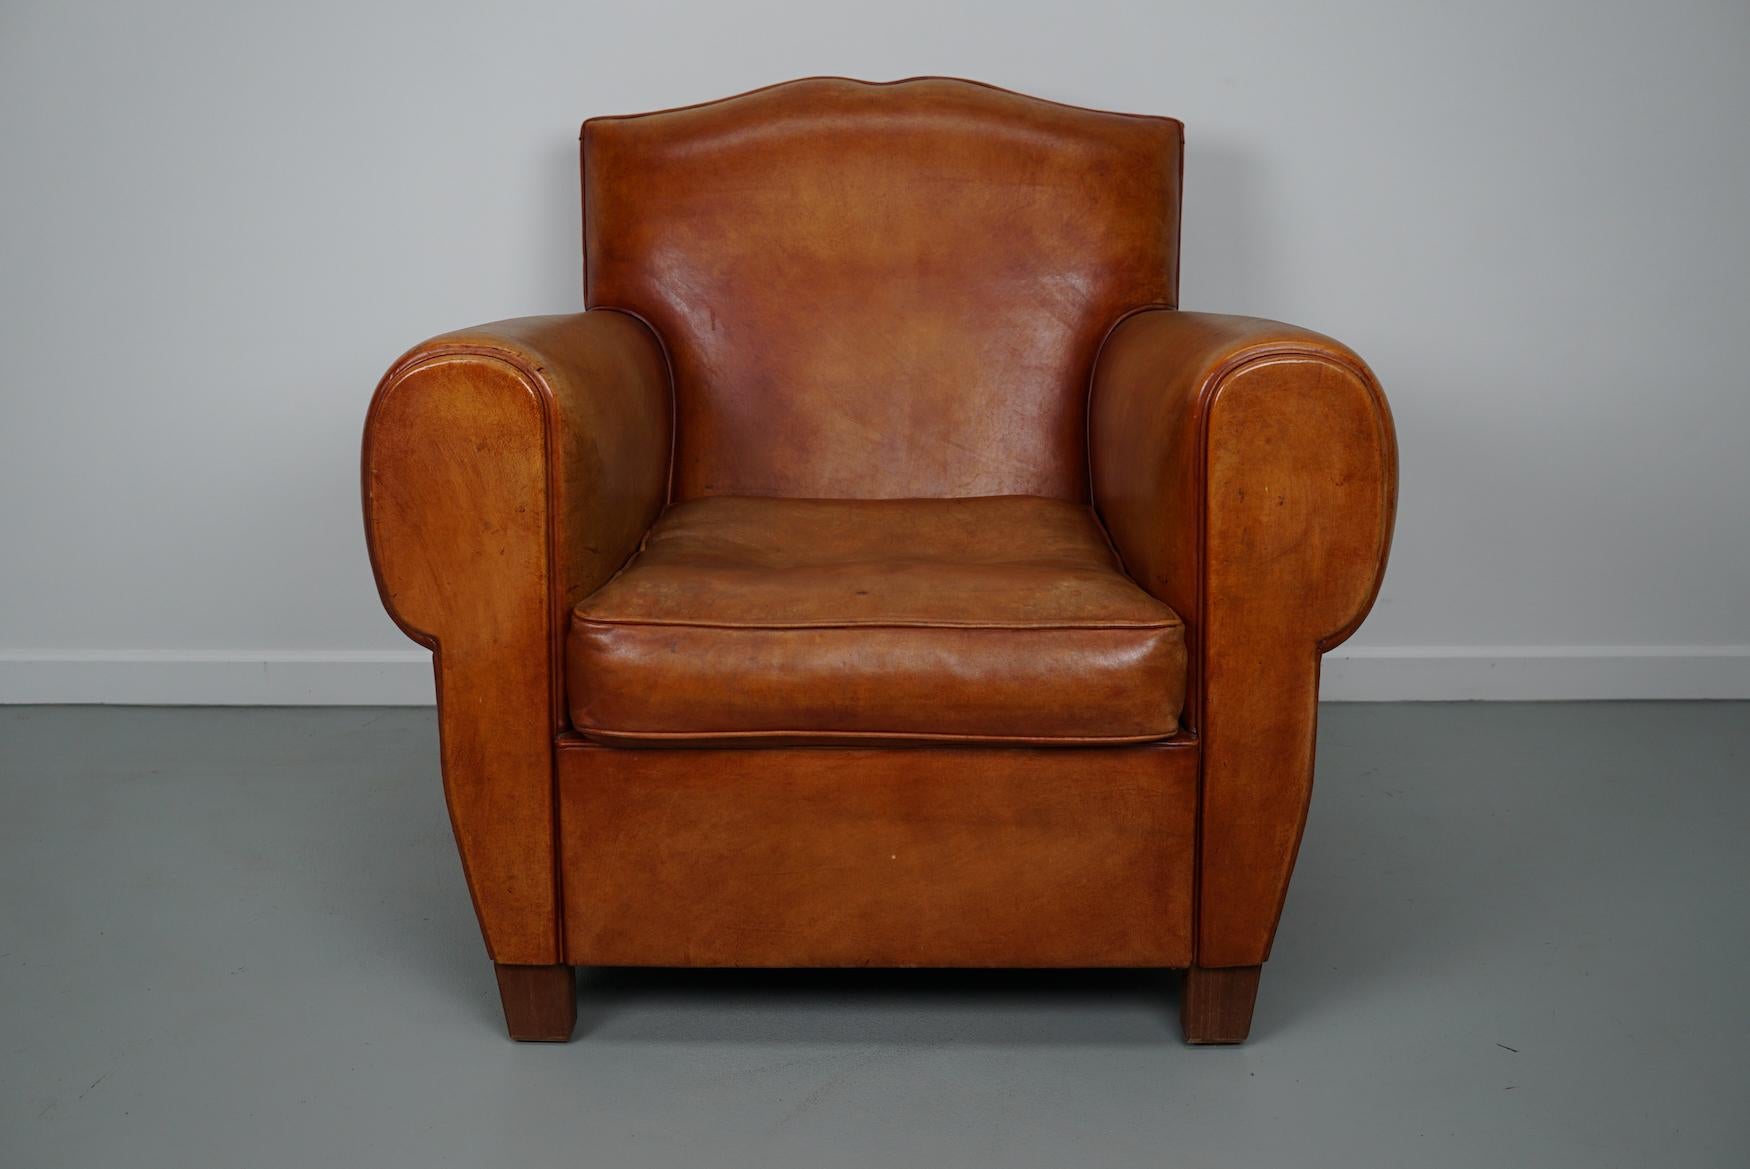 This cognac-colored leather club chair comes from France. It is upholstered with cognac-colored leather and features metal rivets and wooden legs.